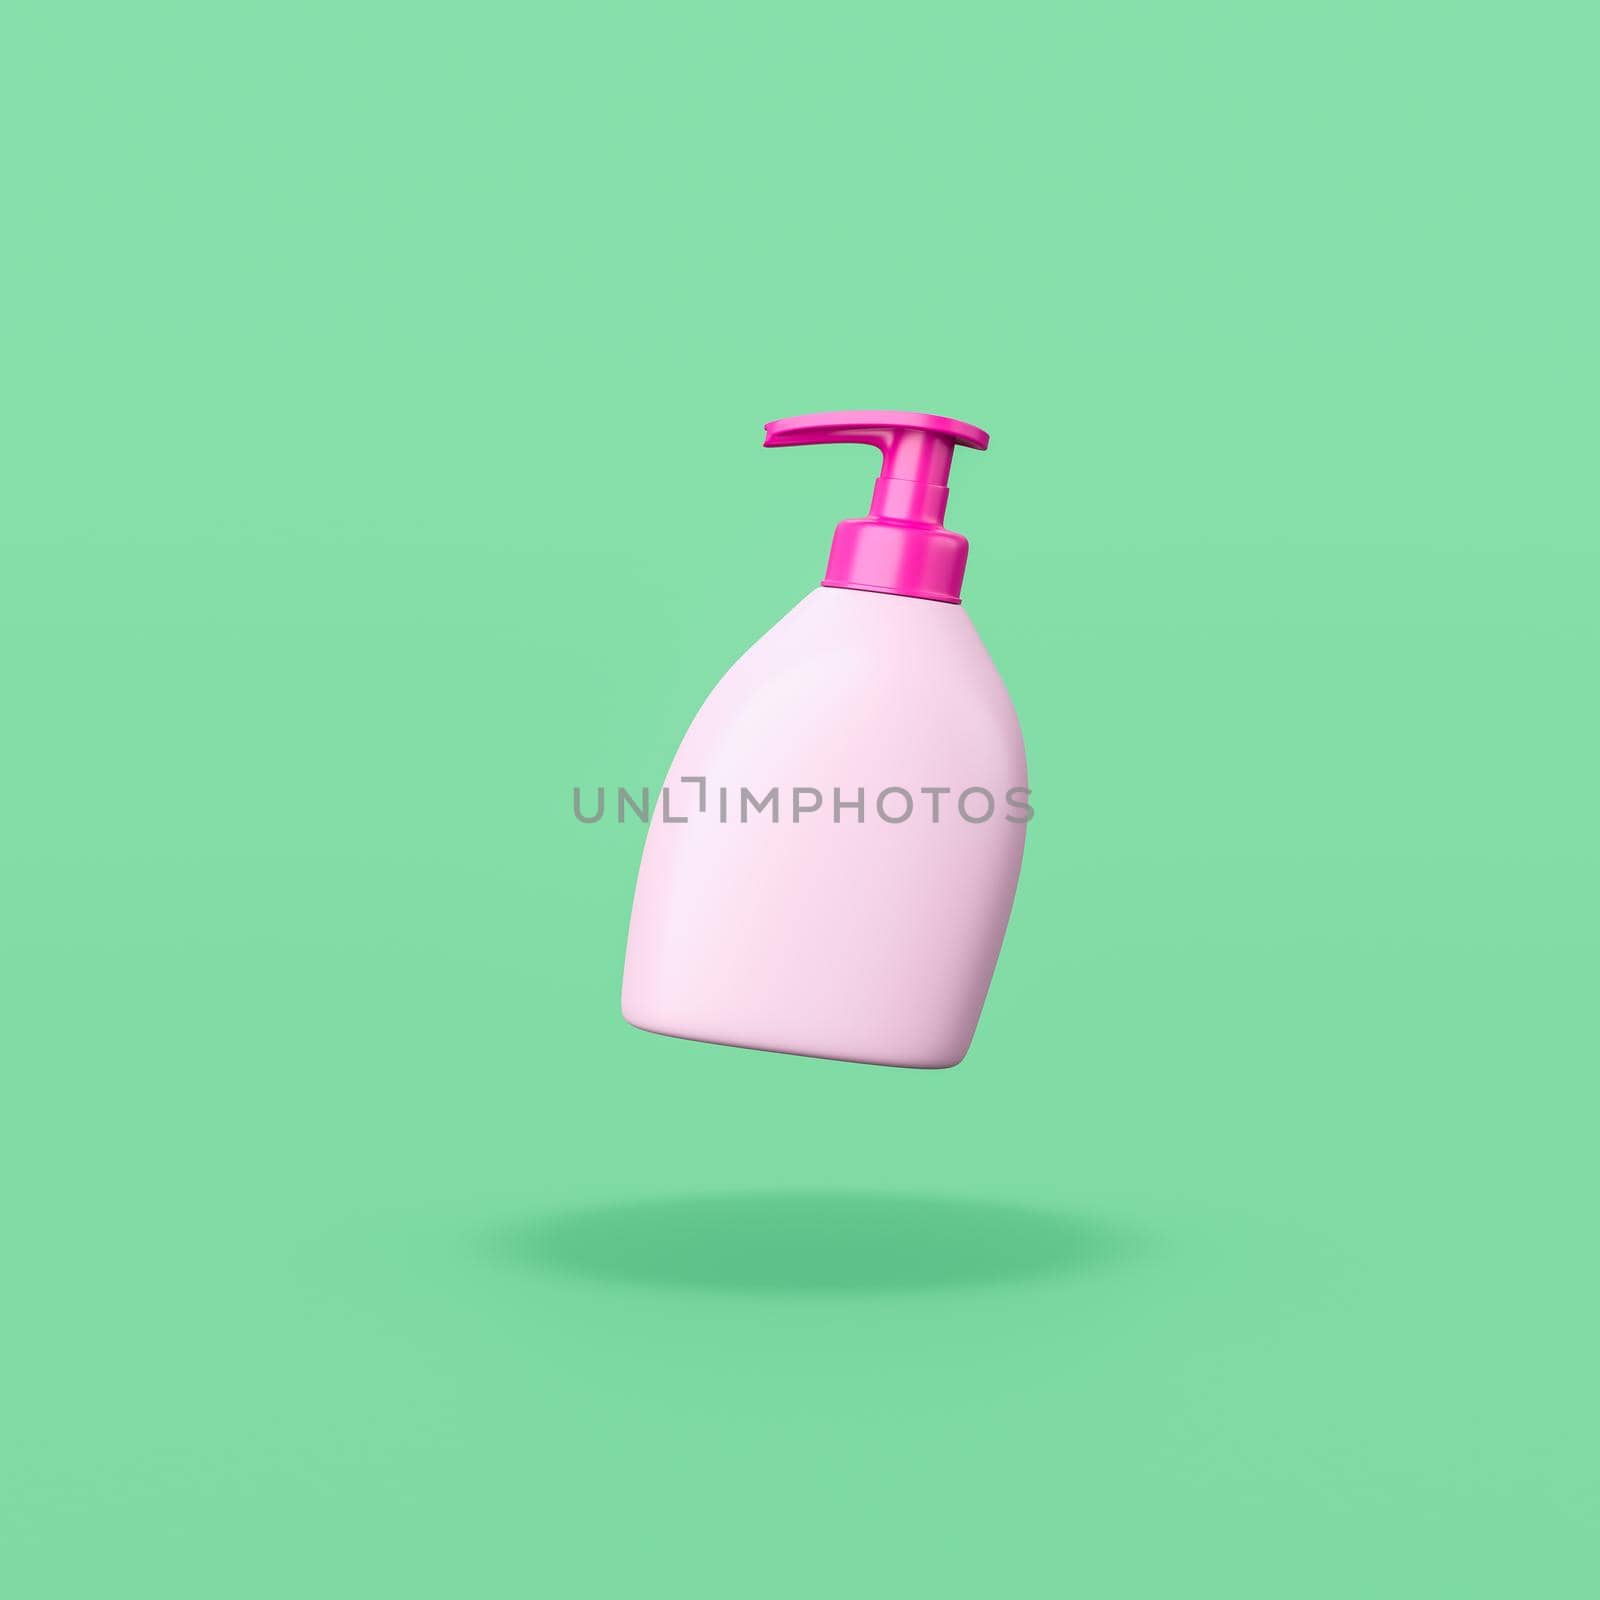 Comic Pink Soap Dispenser on Flat Green Background with Shadow 3D Illustration